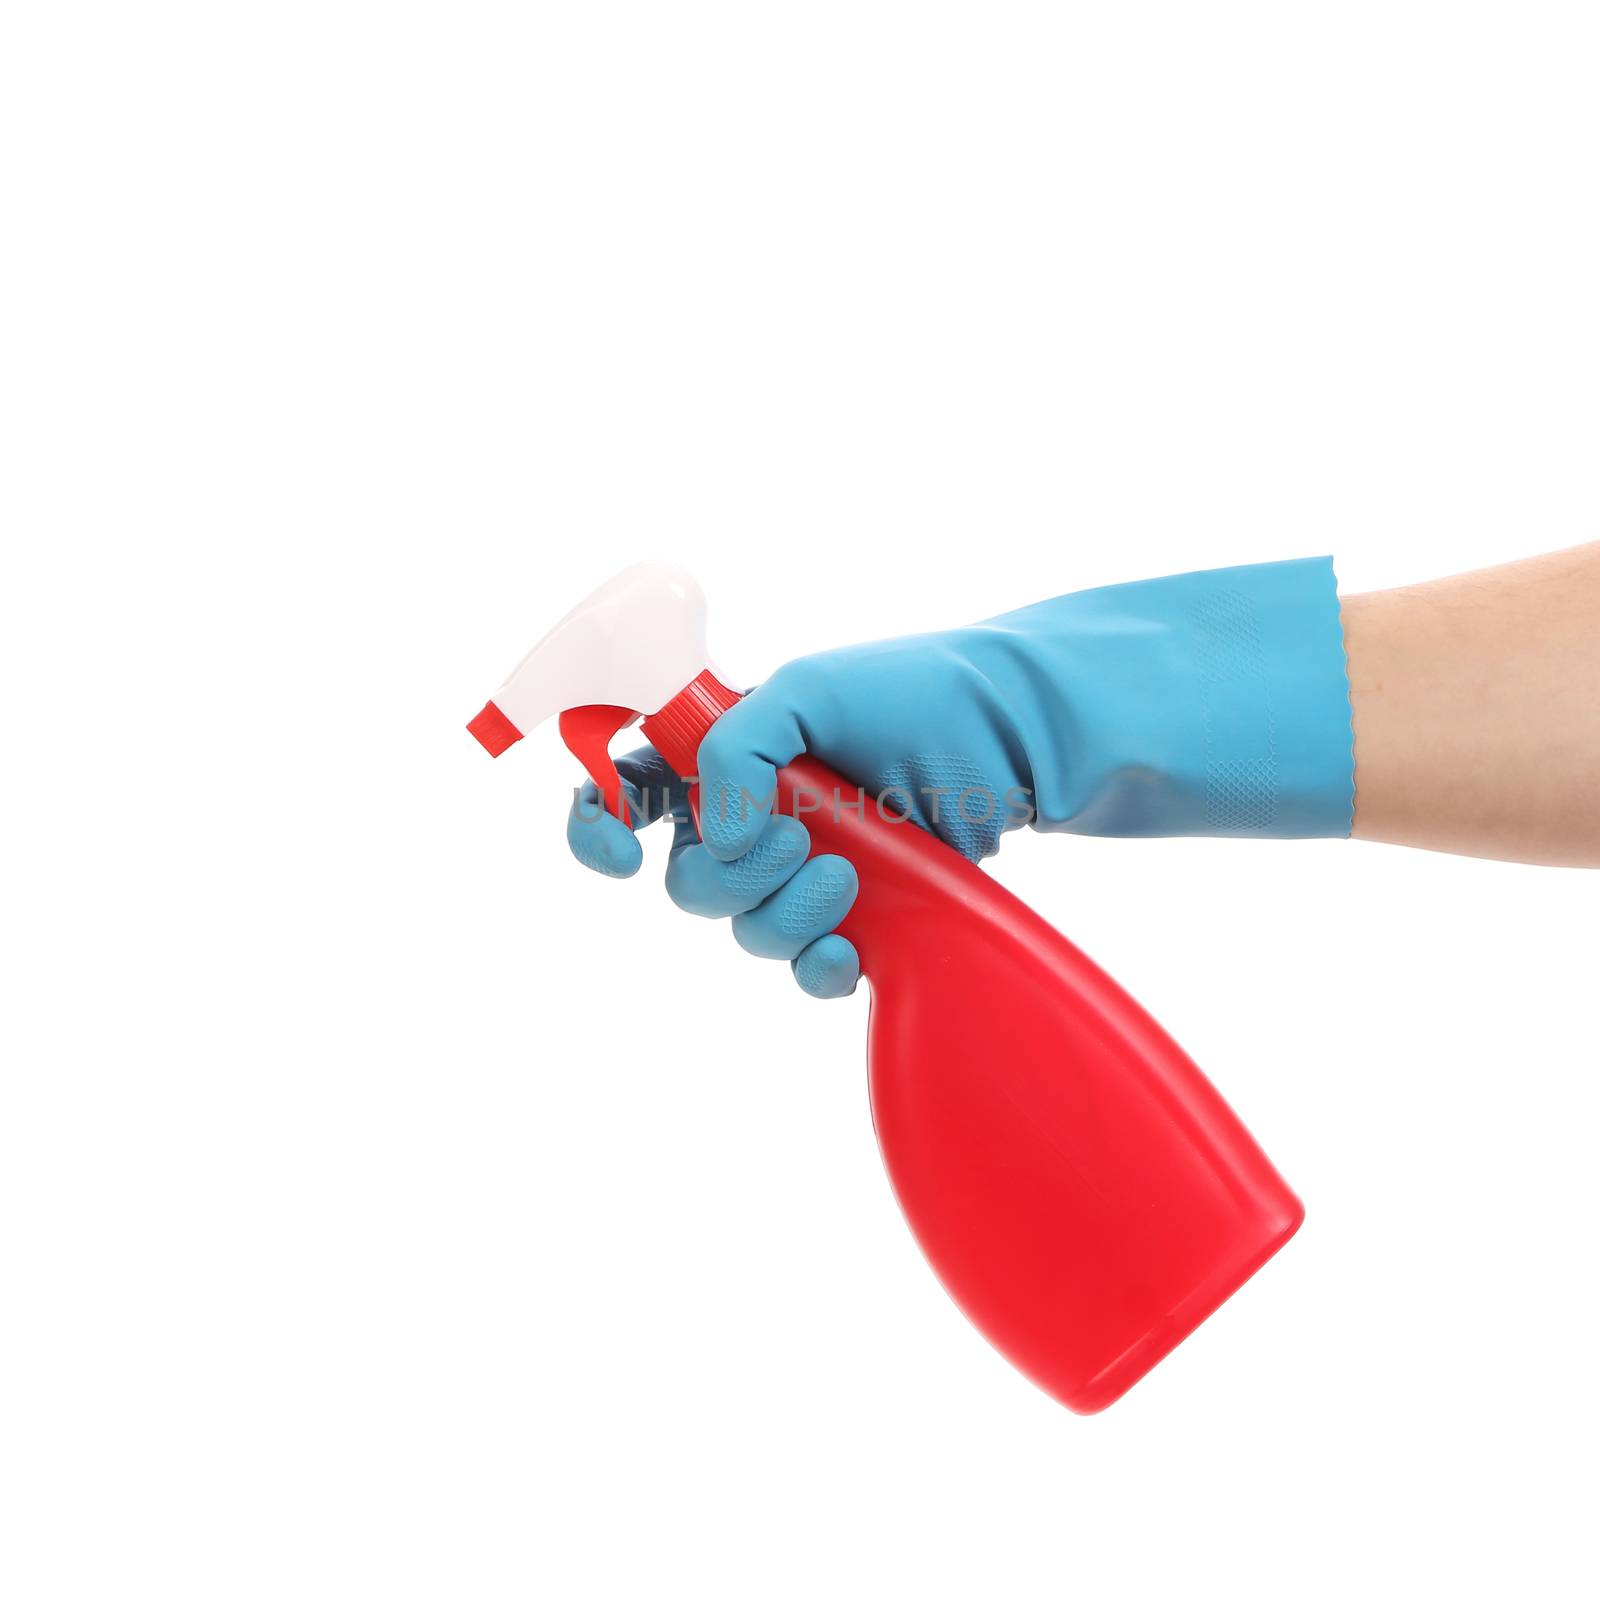 Hand in gloves holds spray bottle. by indigolotos